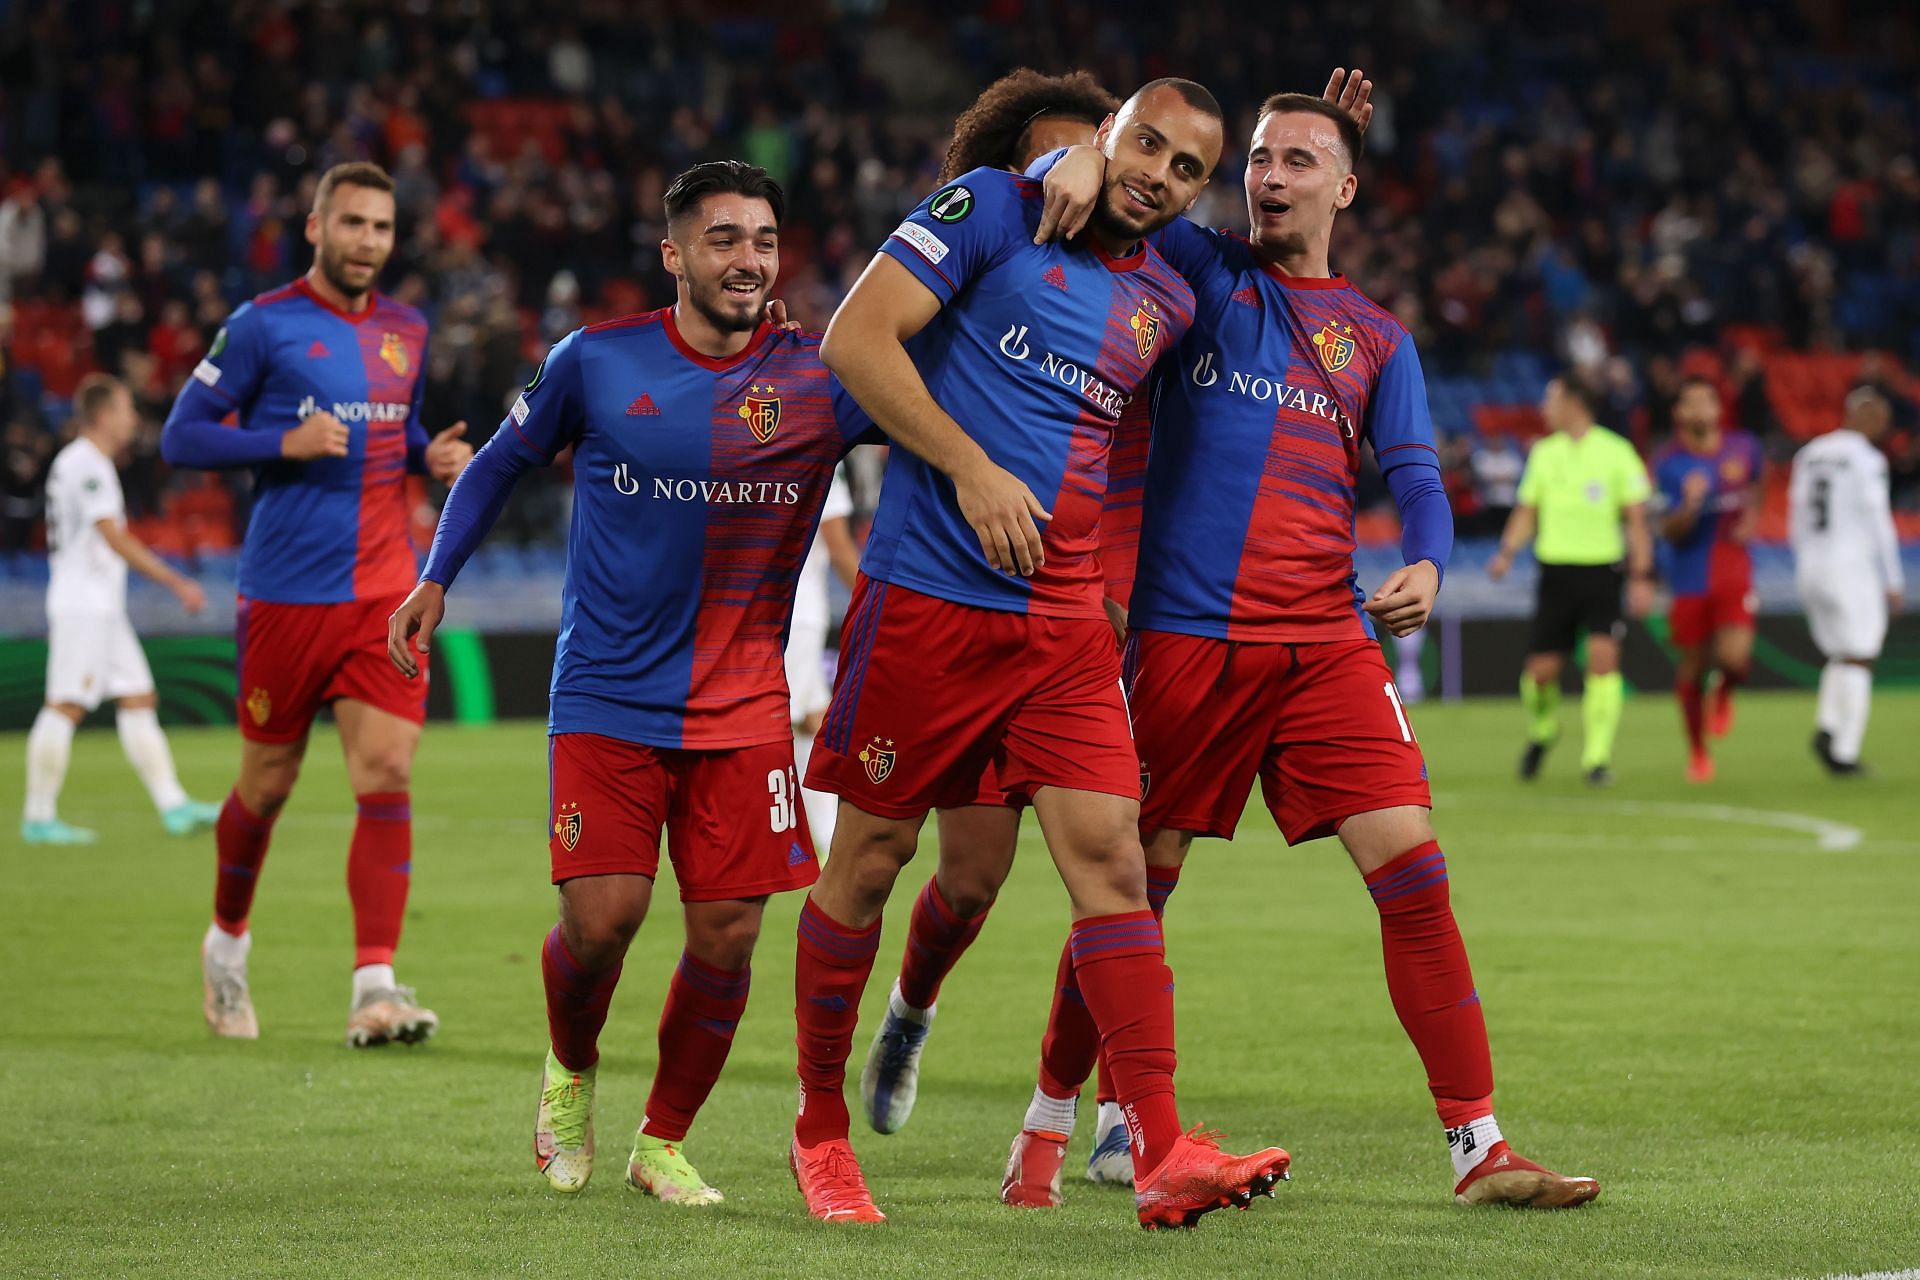 Basel will square off against CSKA Sofia in the Conference League on Thursday.